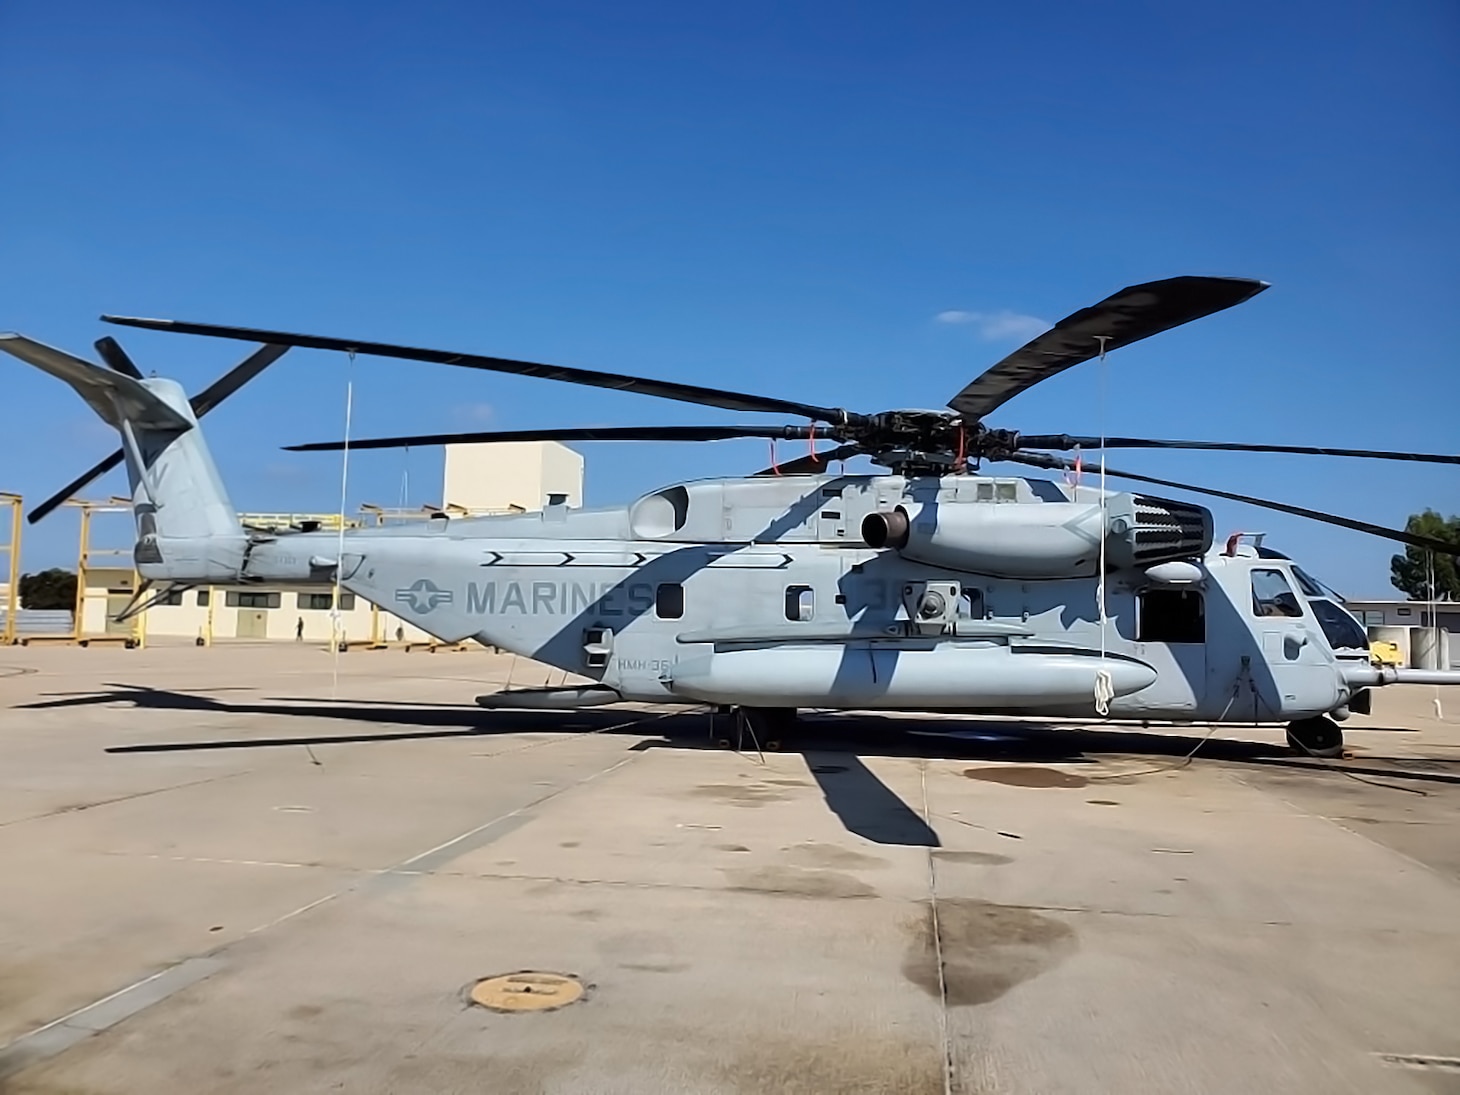 The 50th CH-53E to go through RESET was delivered back to Marine Heavy Helicopter Squadron (HMH) 466 as a Full Mission Capable, turnkey asset following RESET.